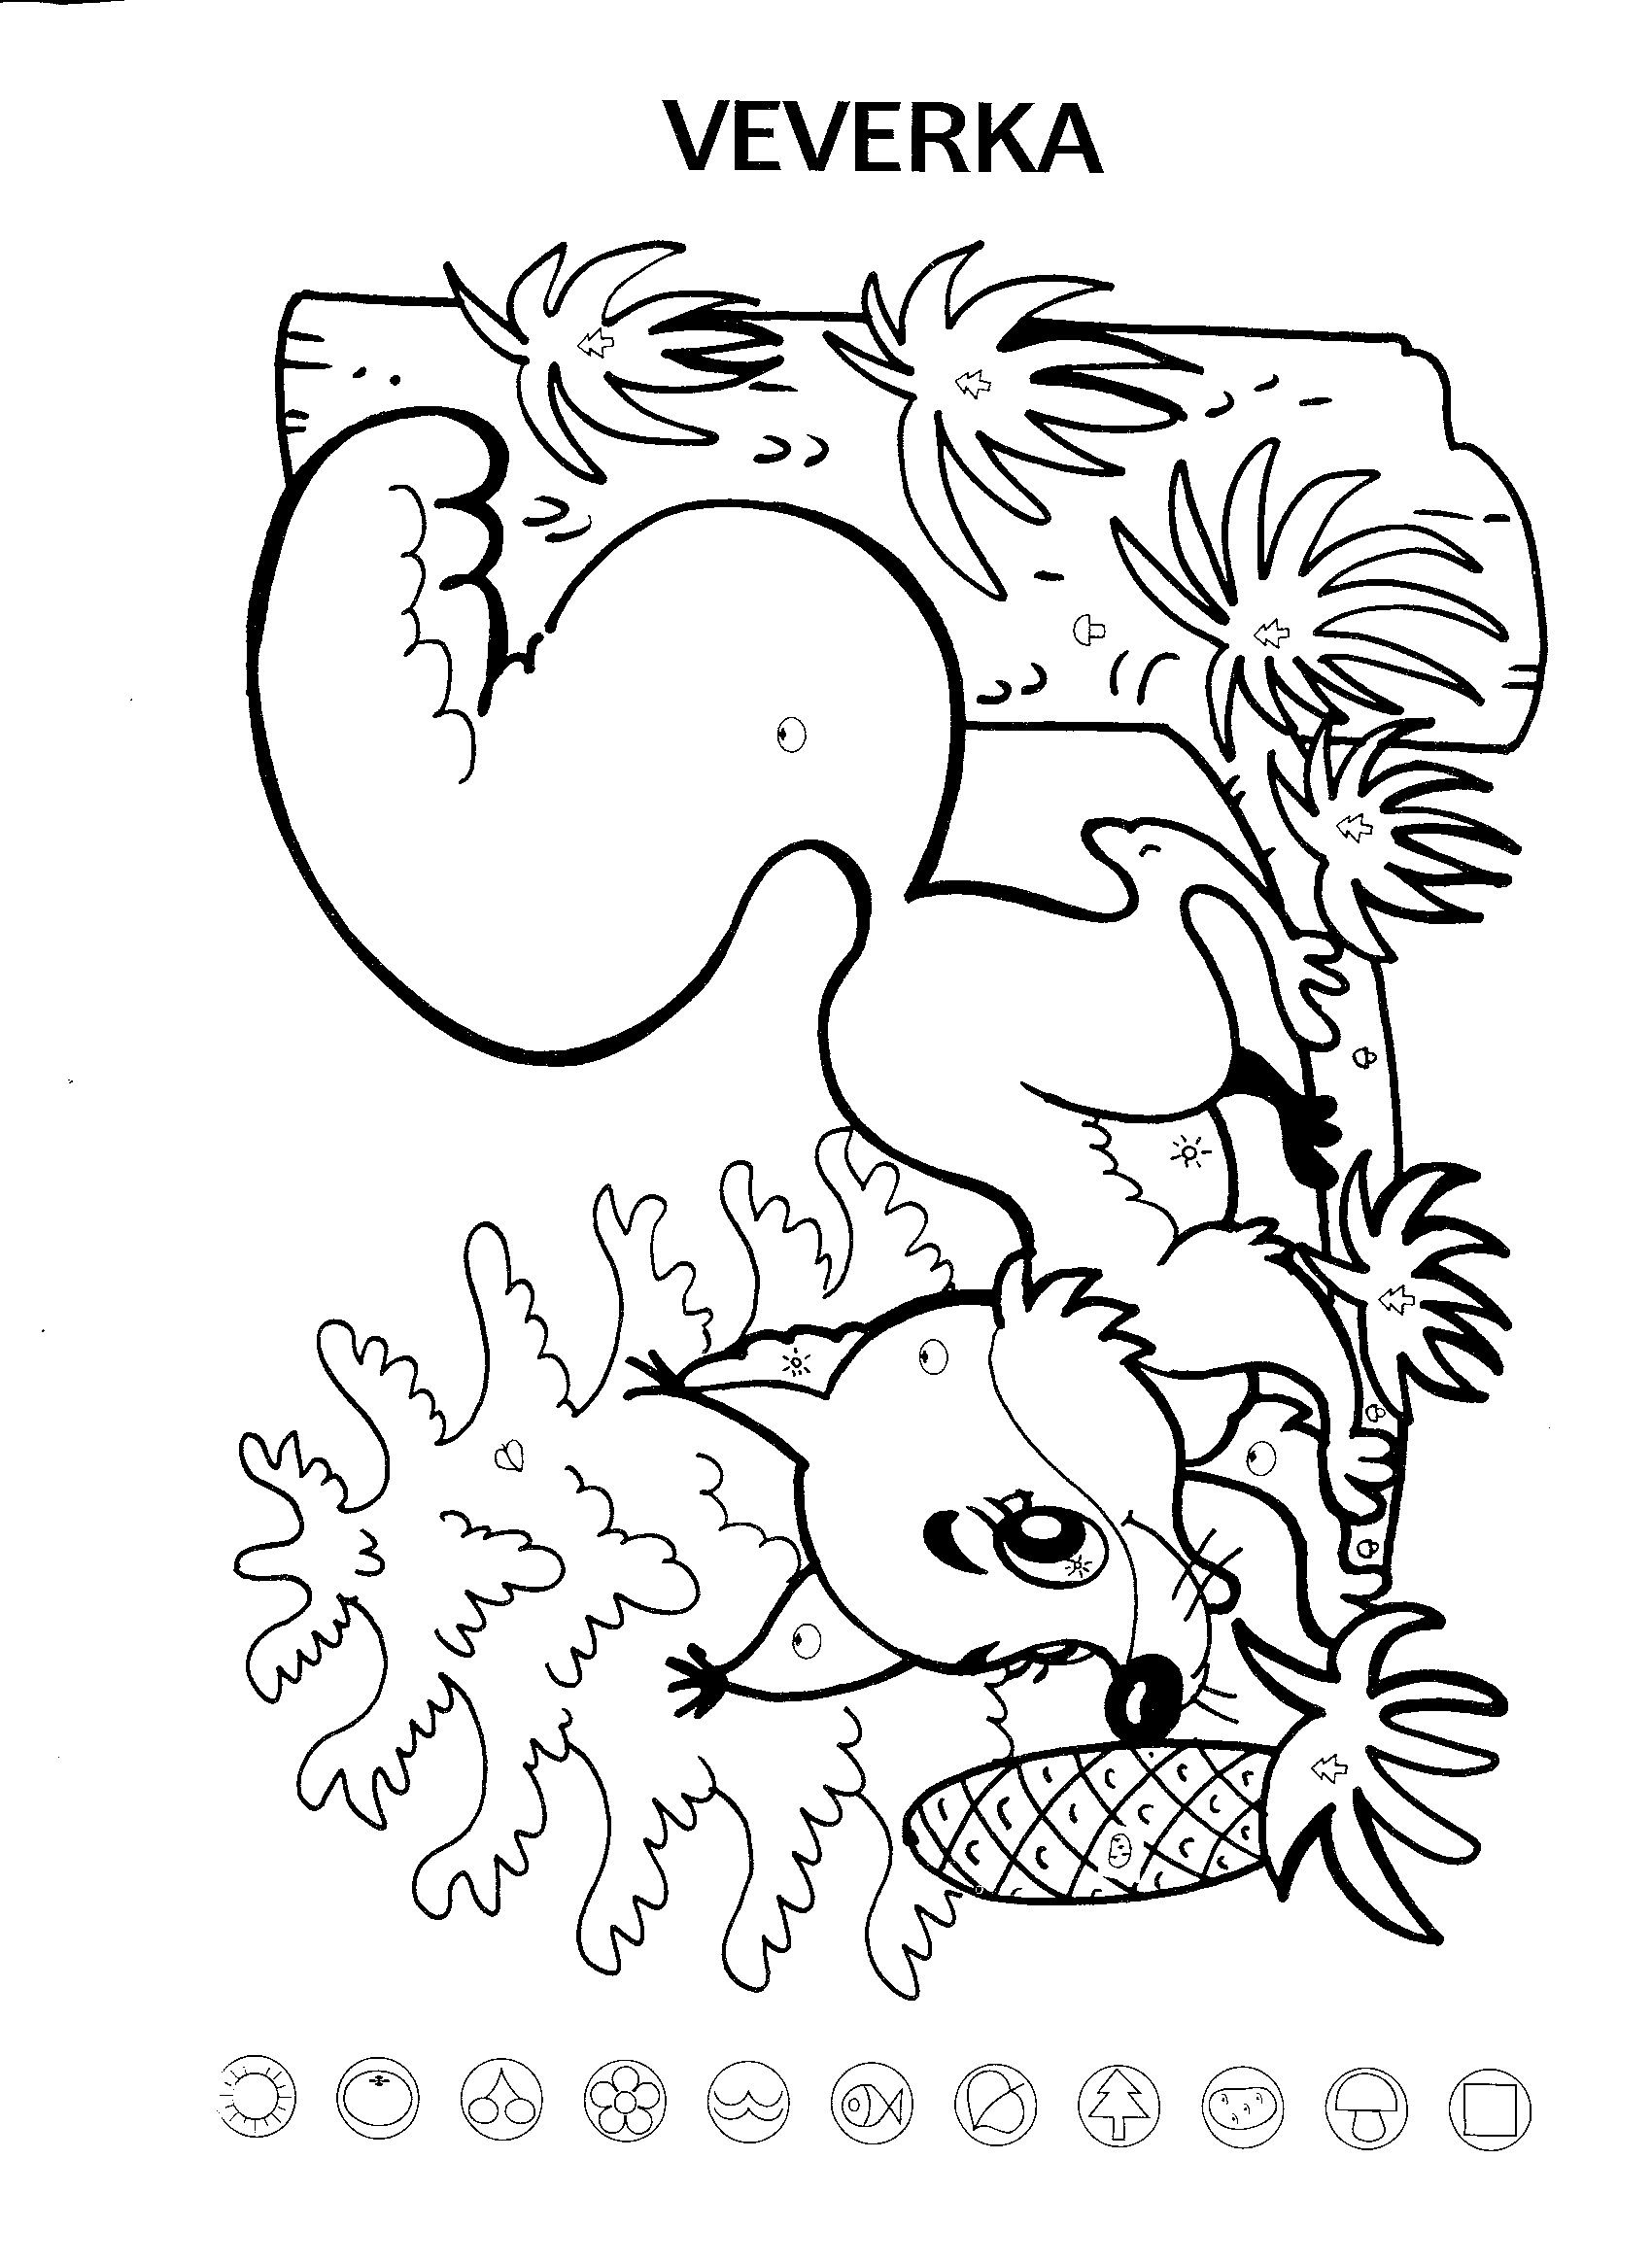 Veverka coloring pages free coloring pages woodland creatures